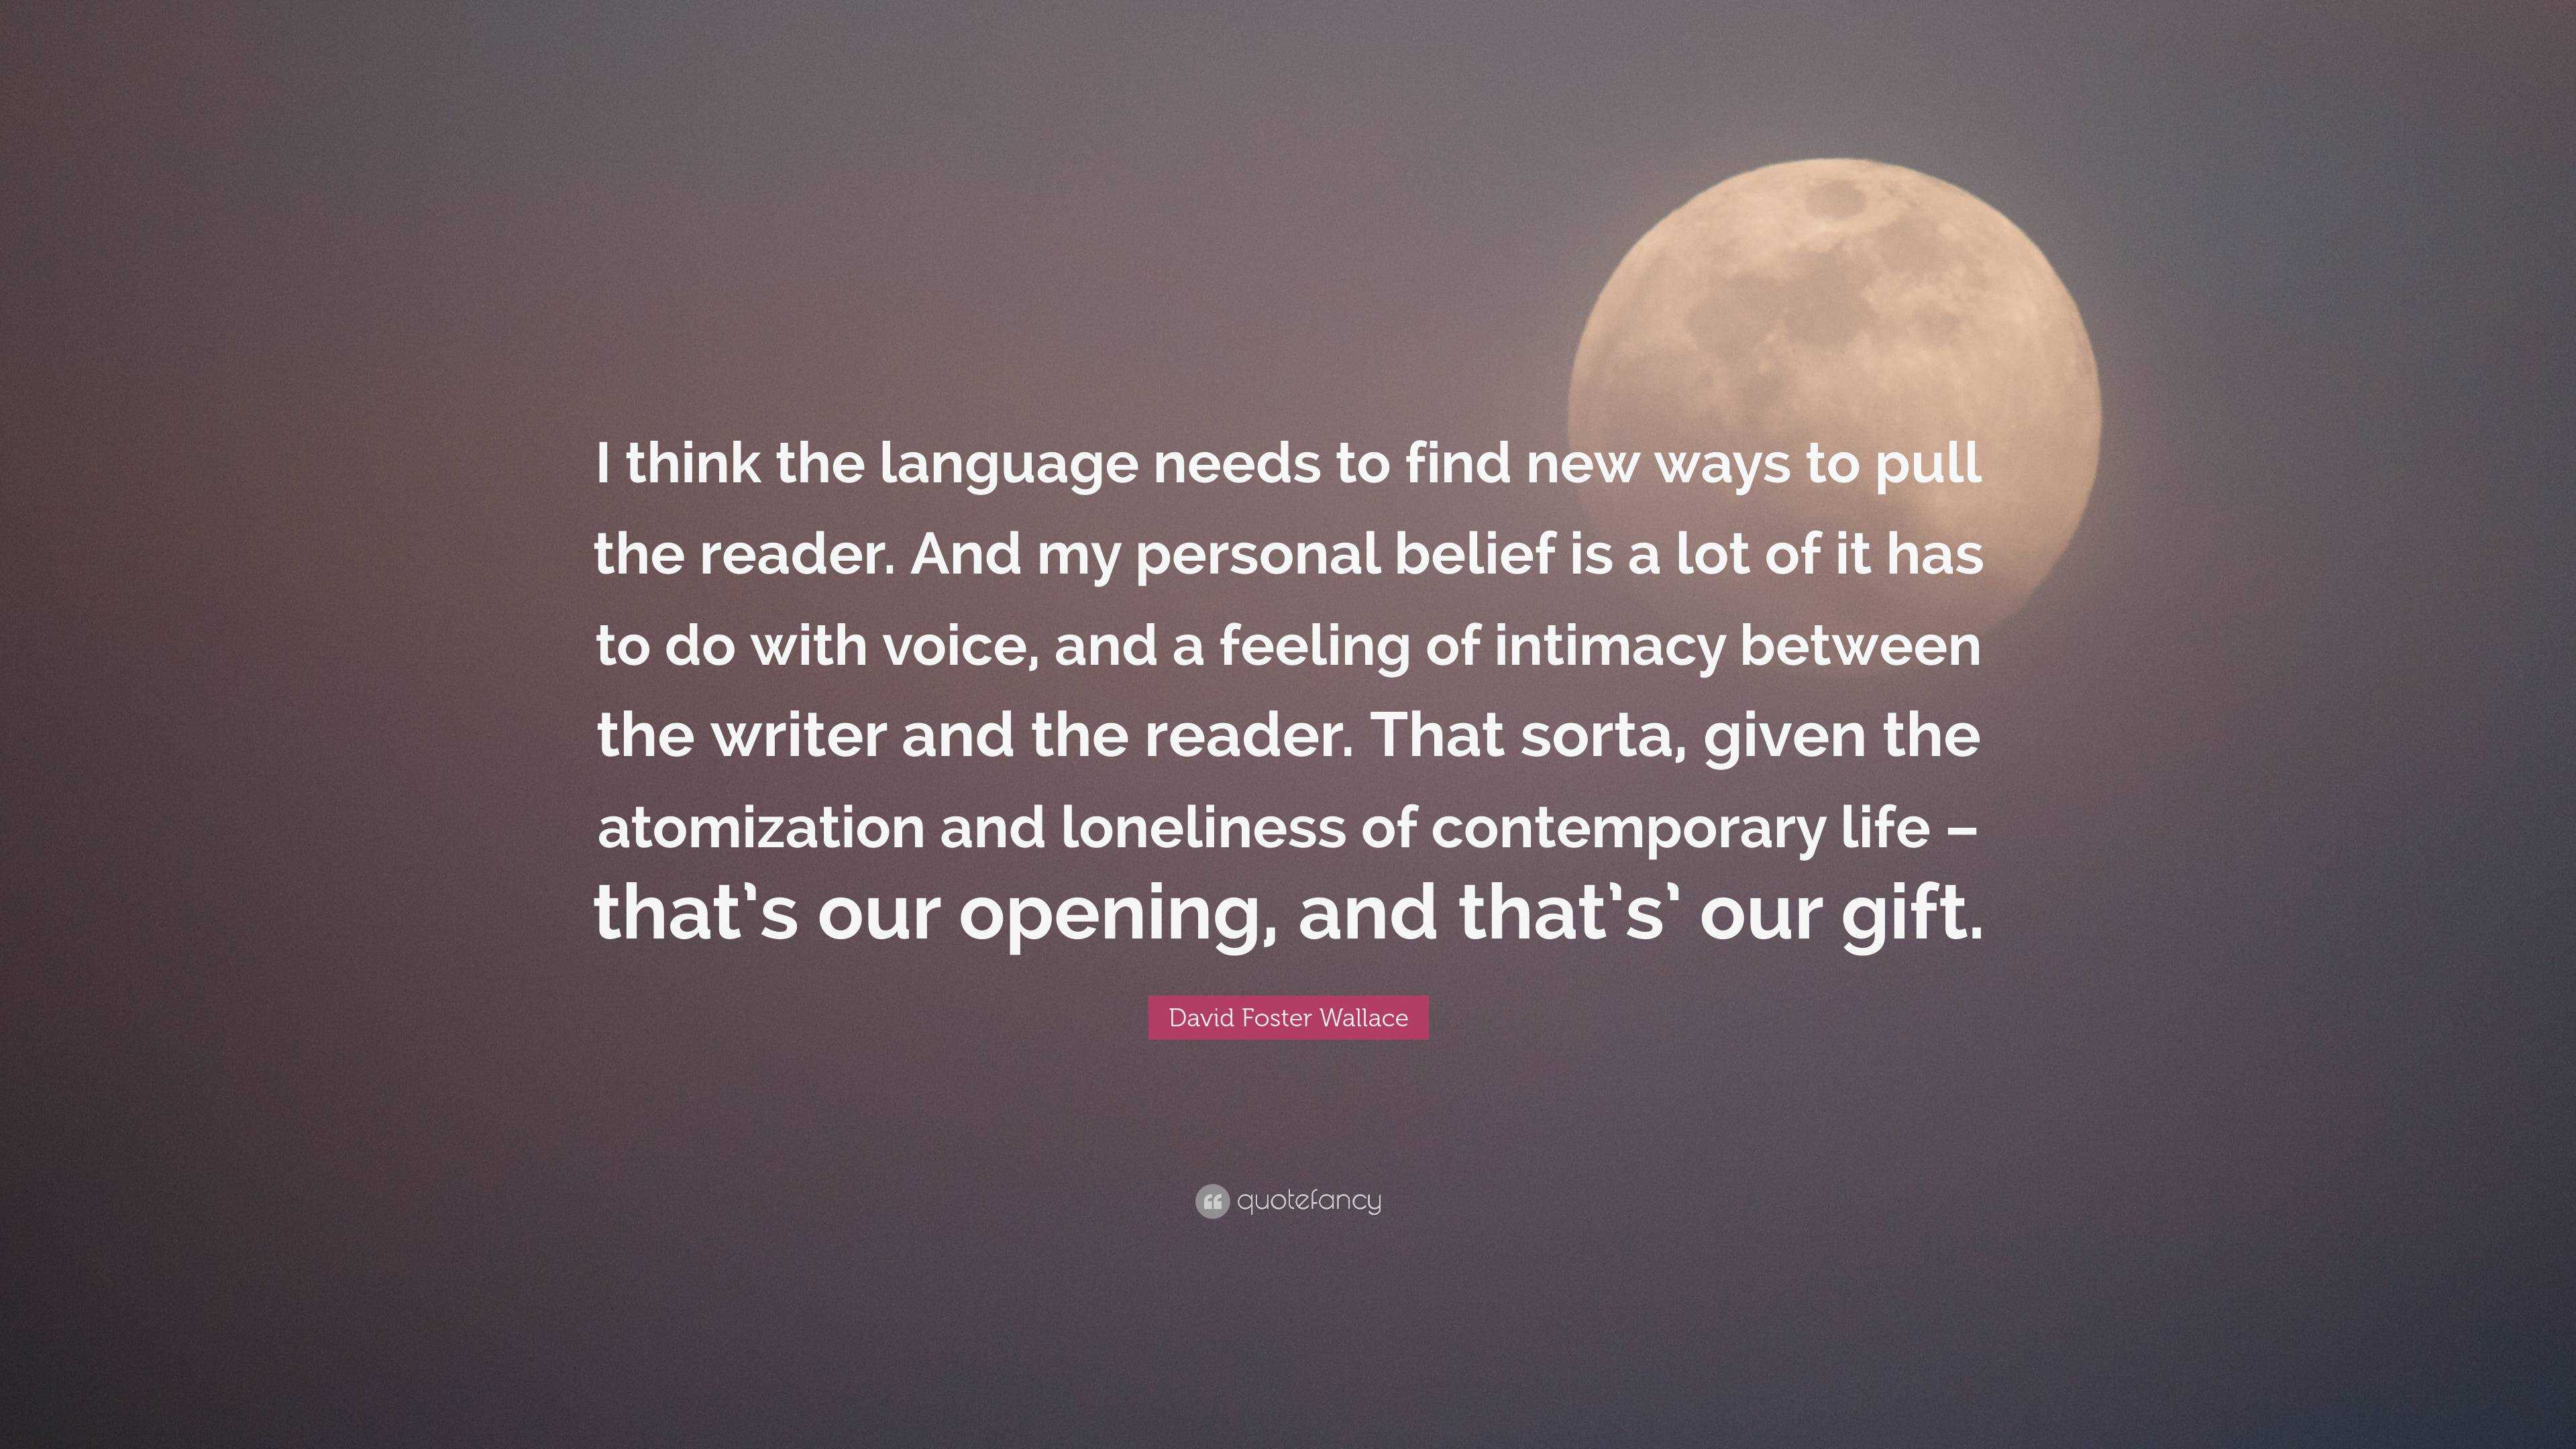 David Foster Wallace Quote: “I think the language needs to find new ways to  pull the reader. And my personal belief is a lot of it has to do with  voi”